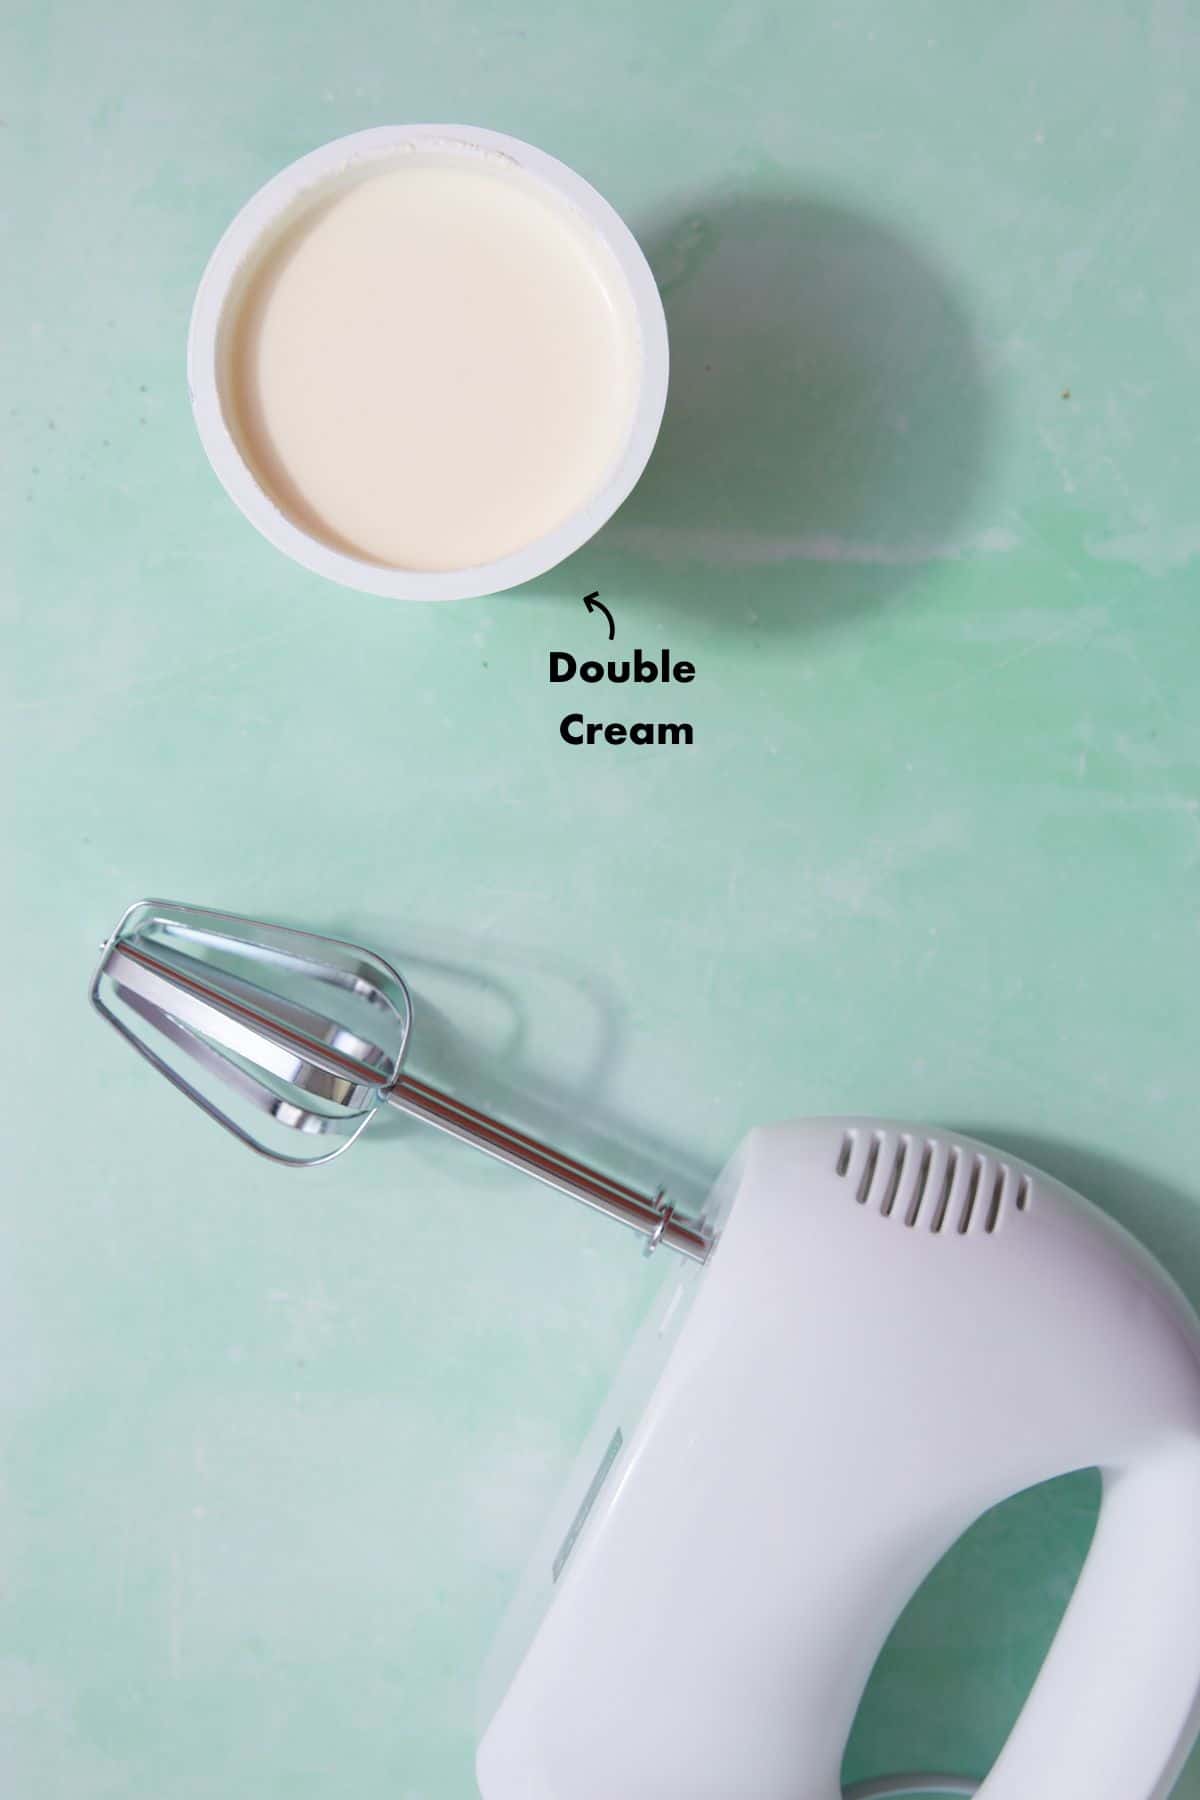 A pot of cream and a hand mixer laid out on a pale blue back ground.